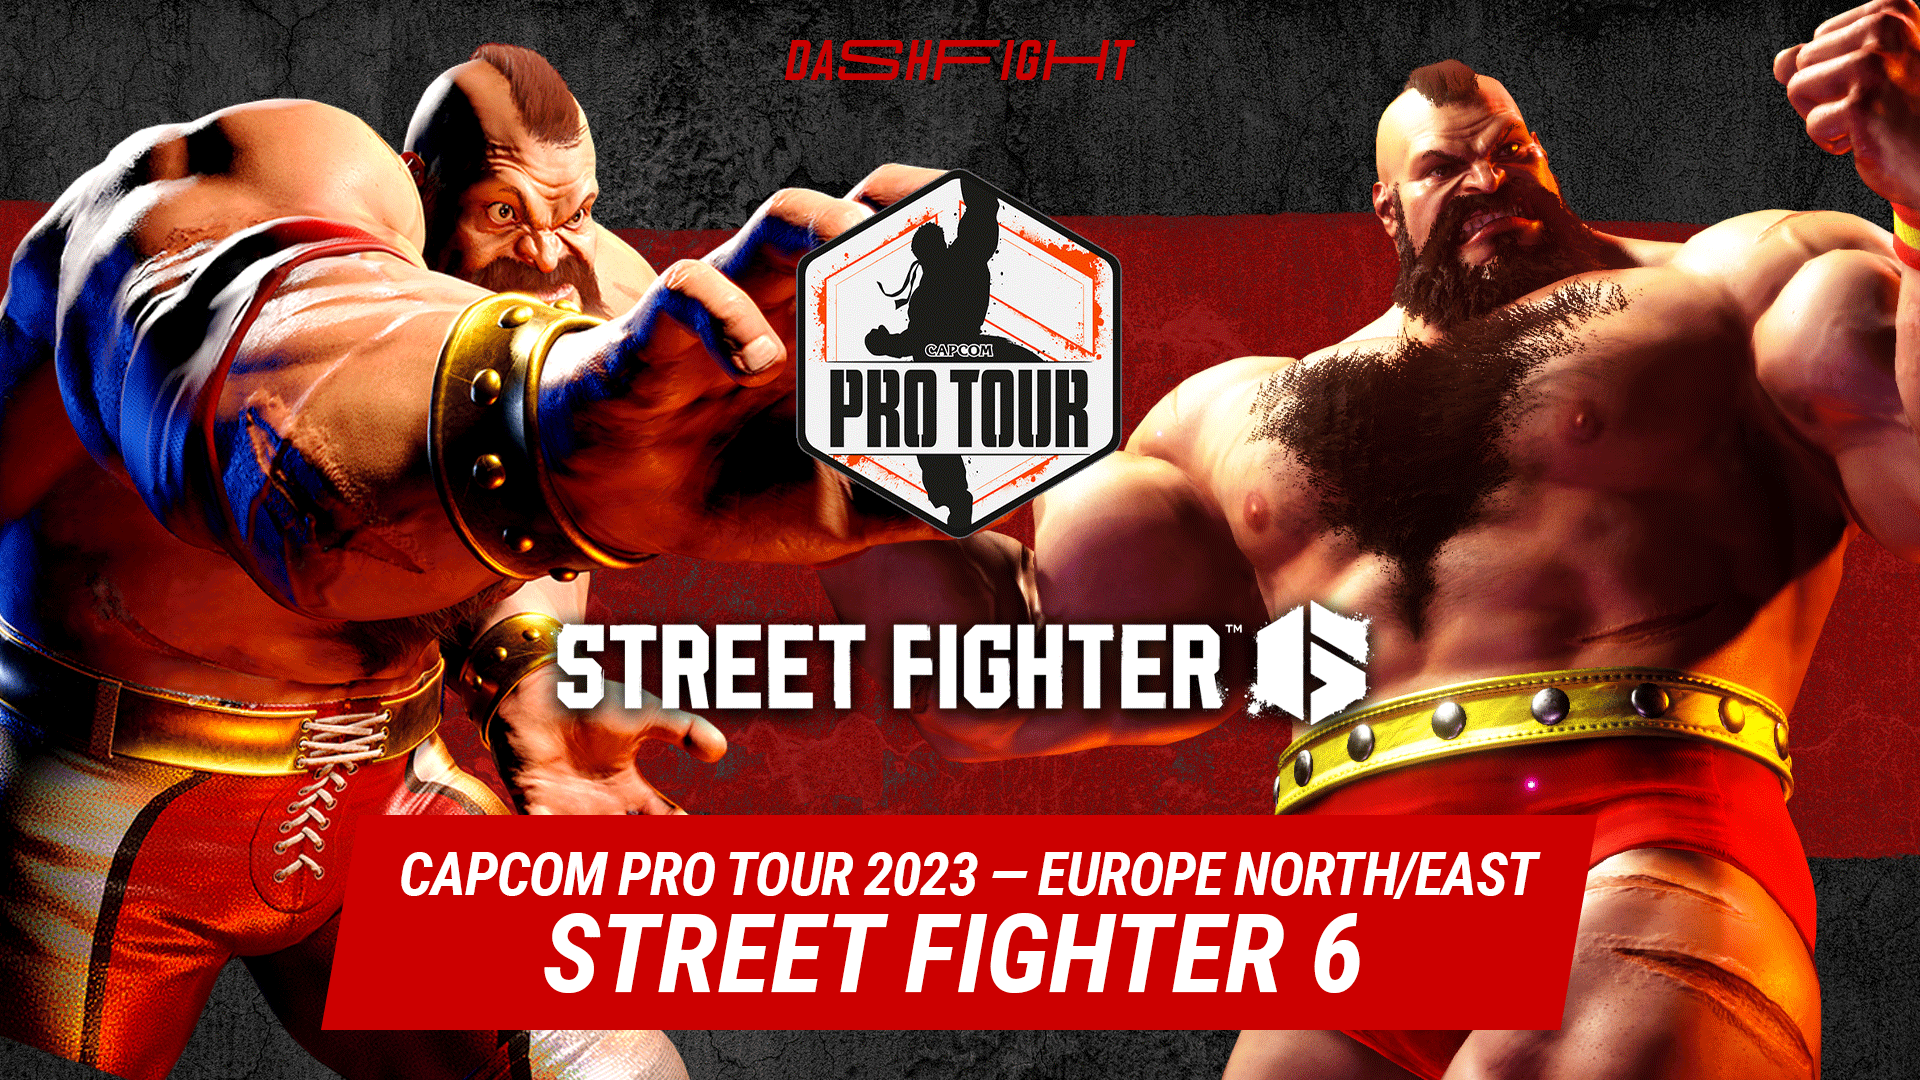 Capcom Pro Tour 2023 Europe North/East Results and Standings